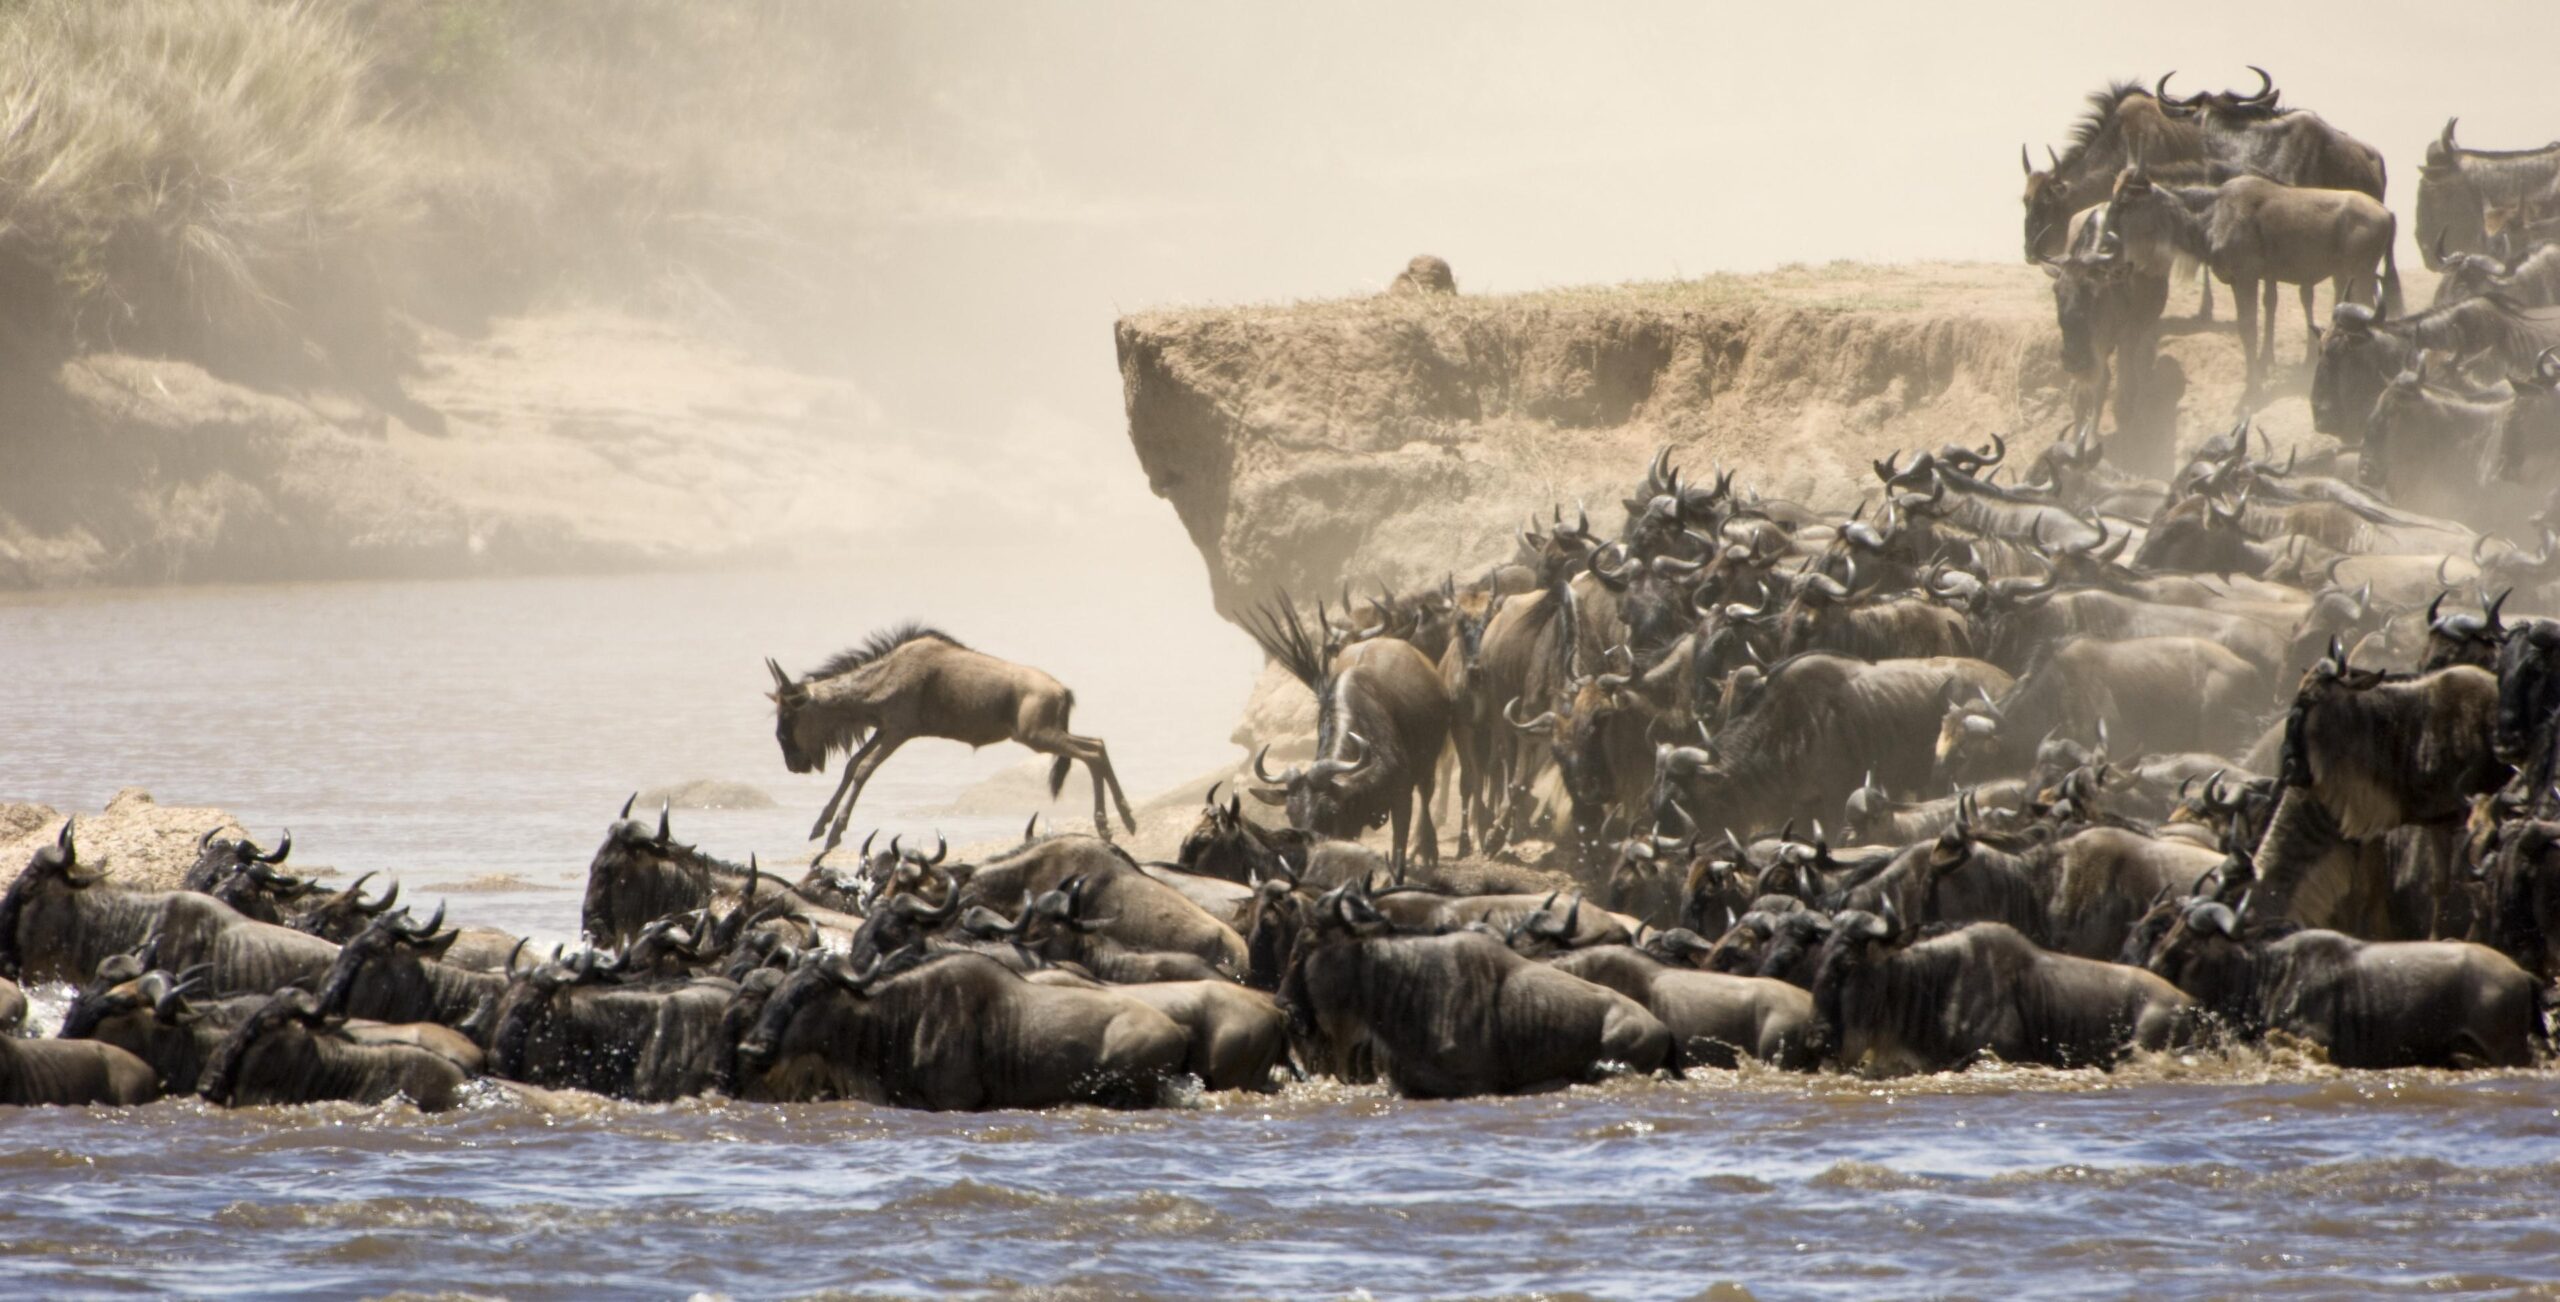 Dramatic Great Wildbeest Expirence In Serengeti National Park